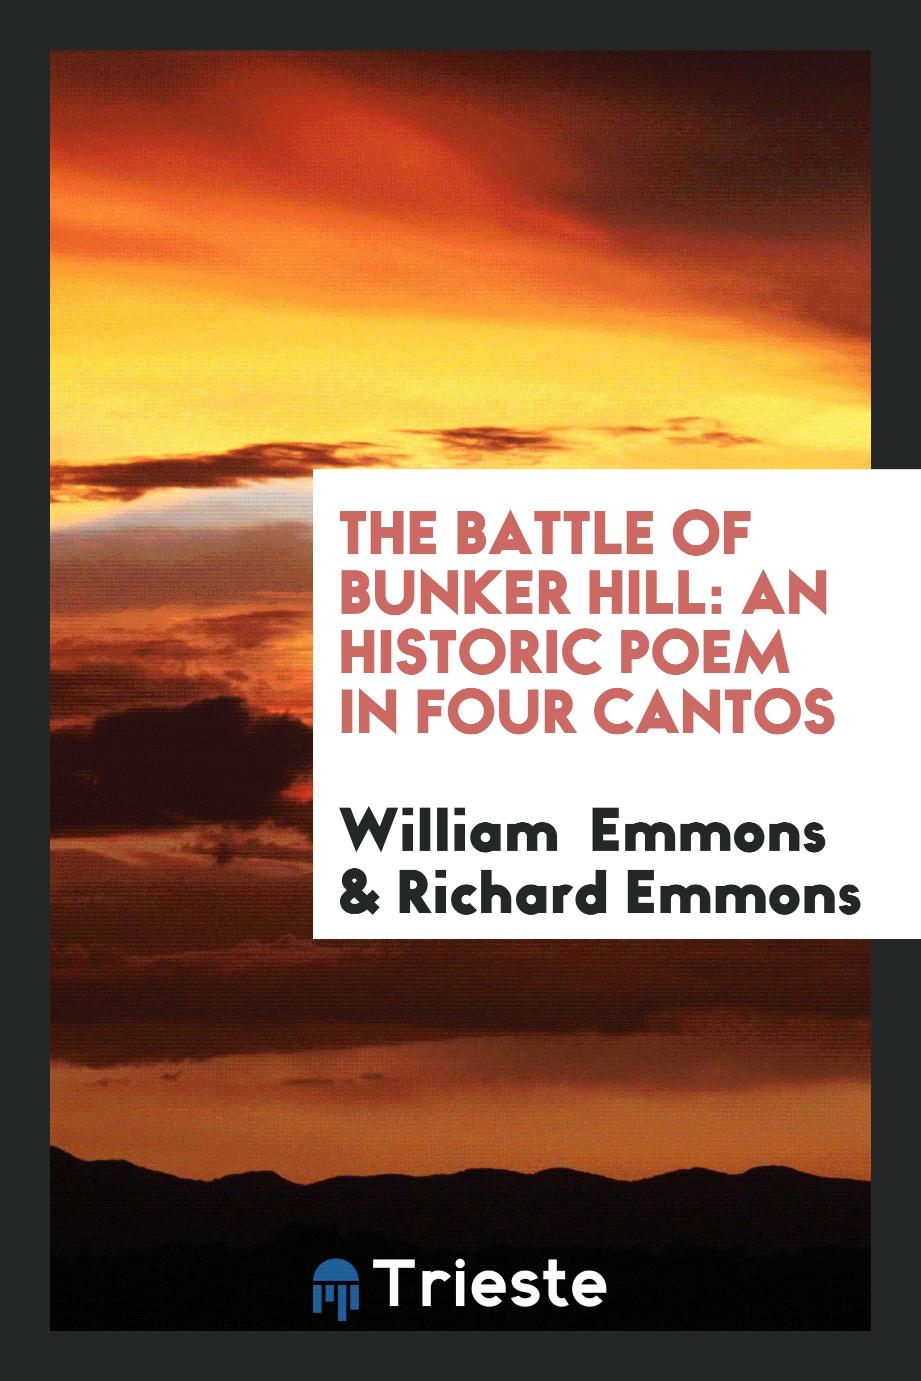 The battle of Bunker Hill: An Historic Poem in Four Cantos